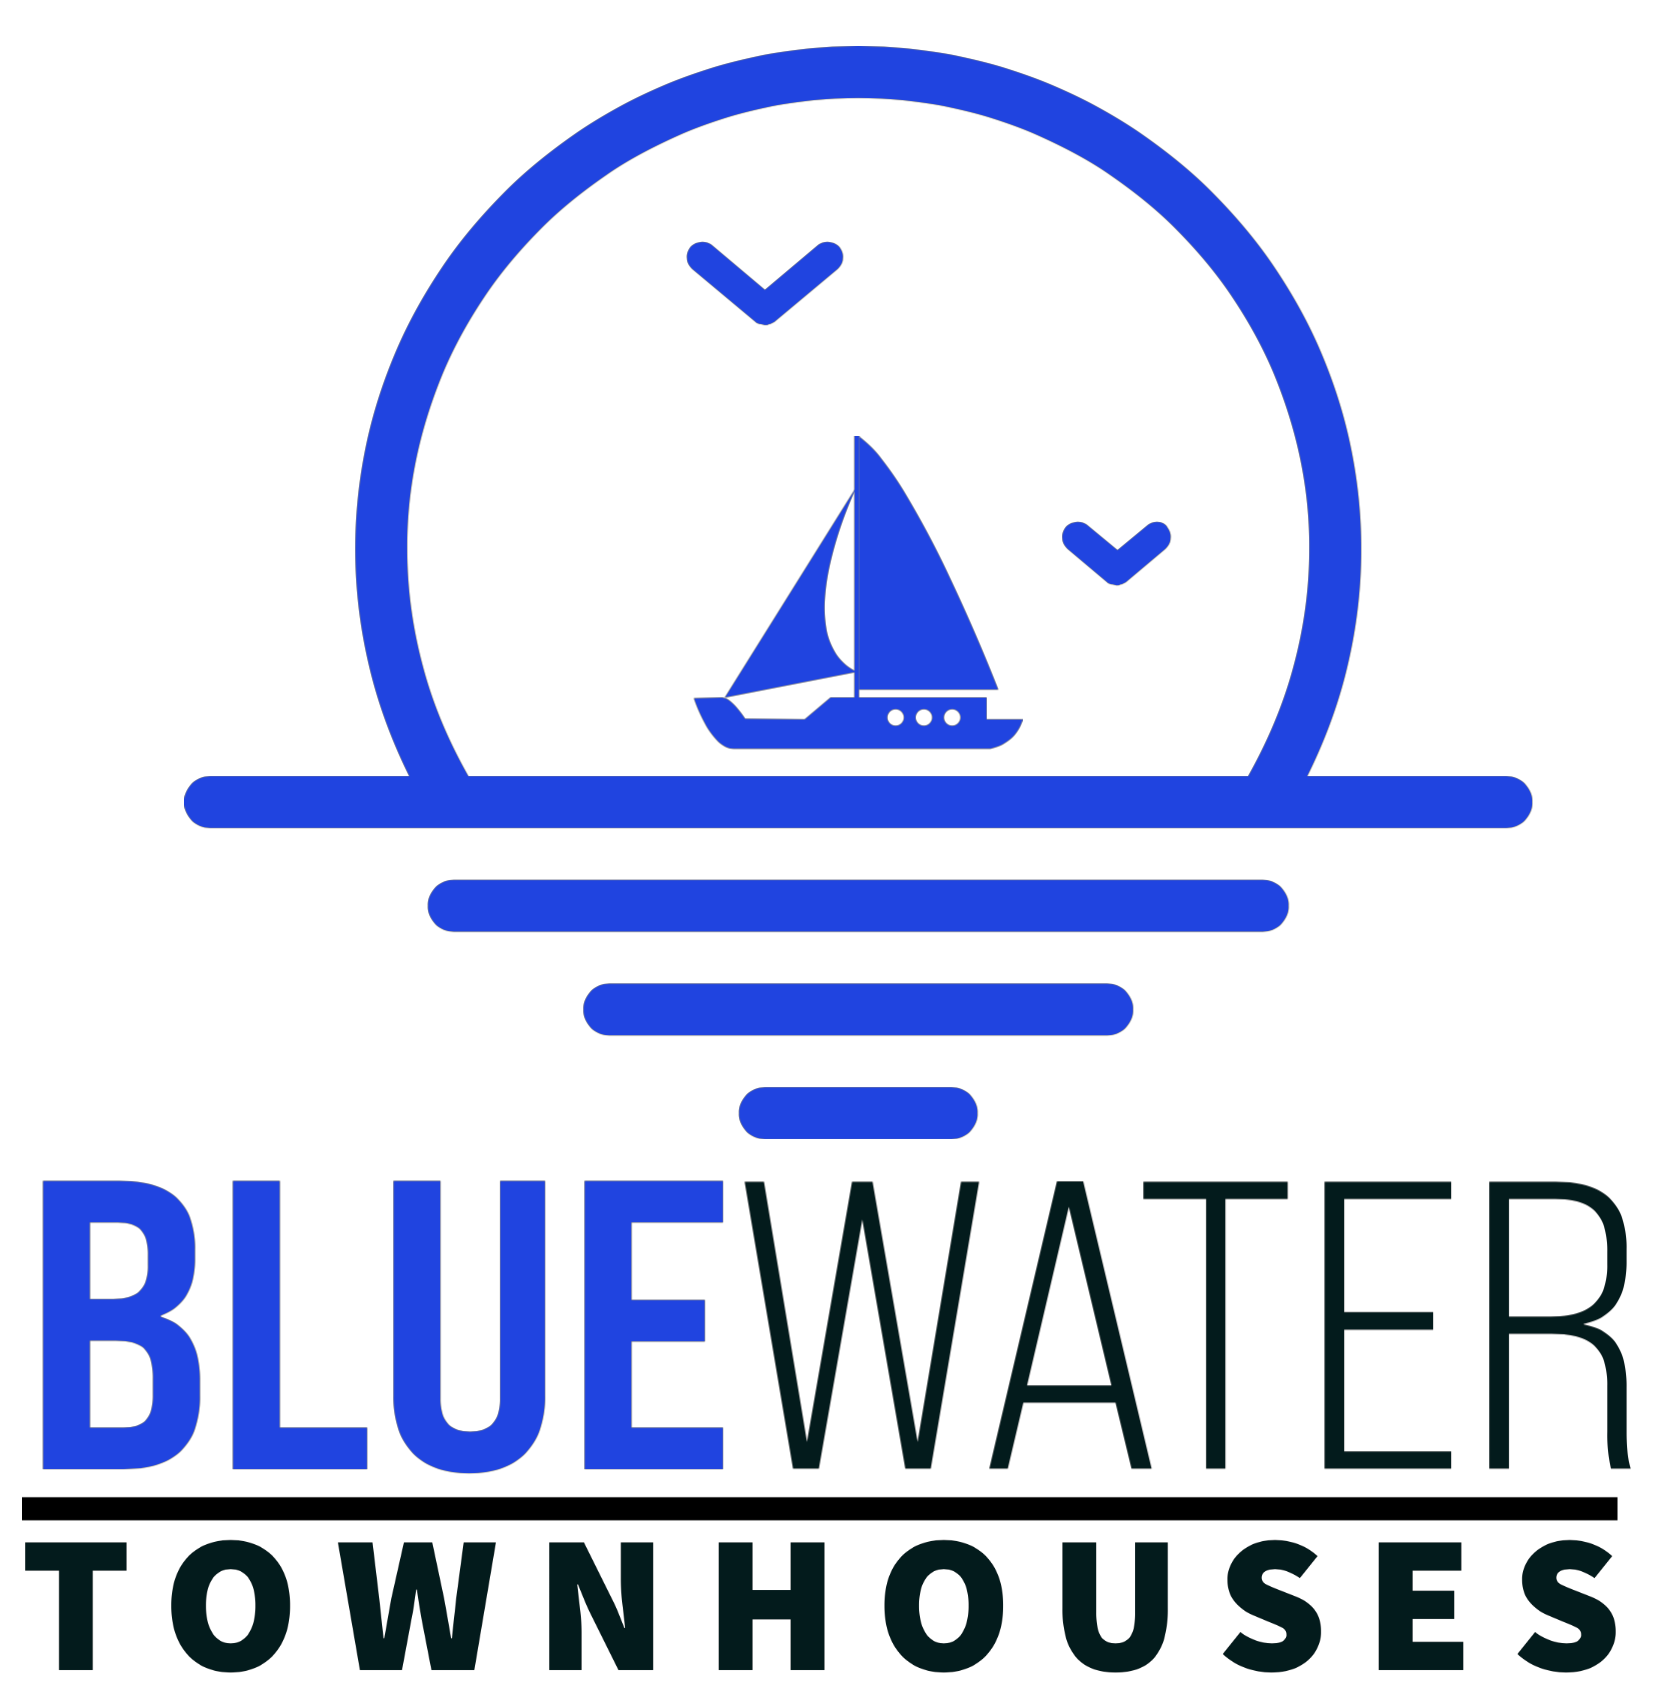 Bluewater townhouses logo